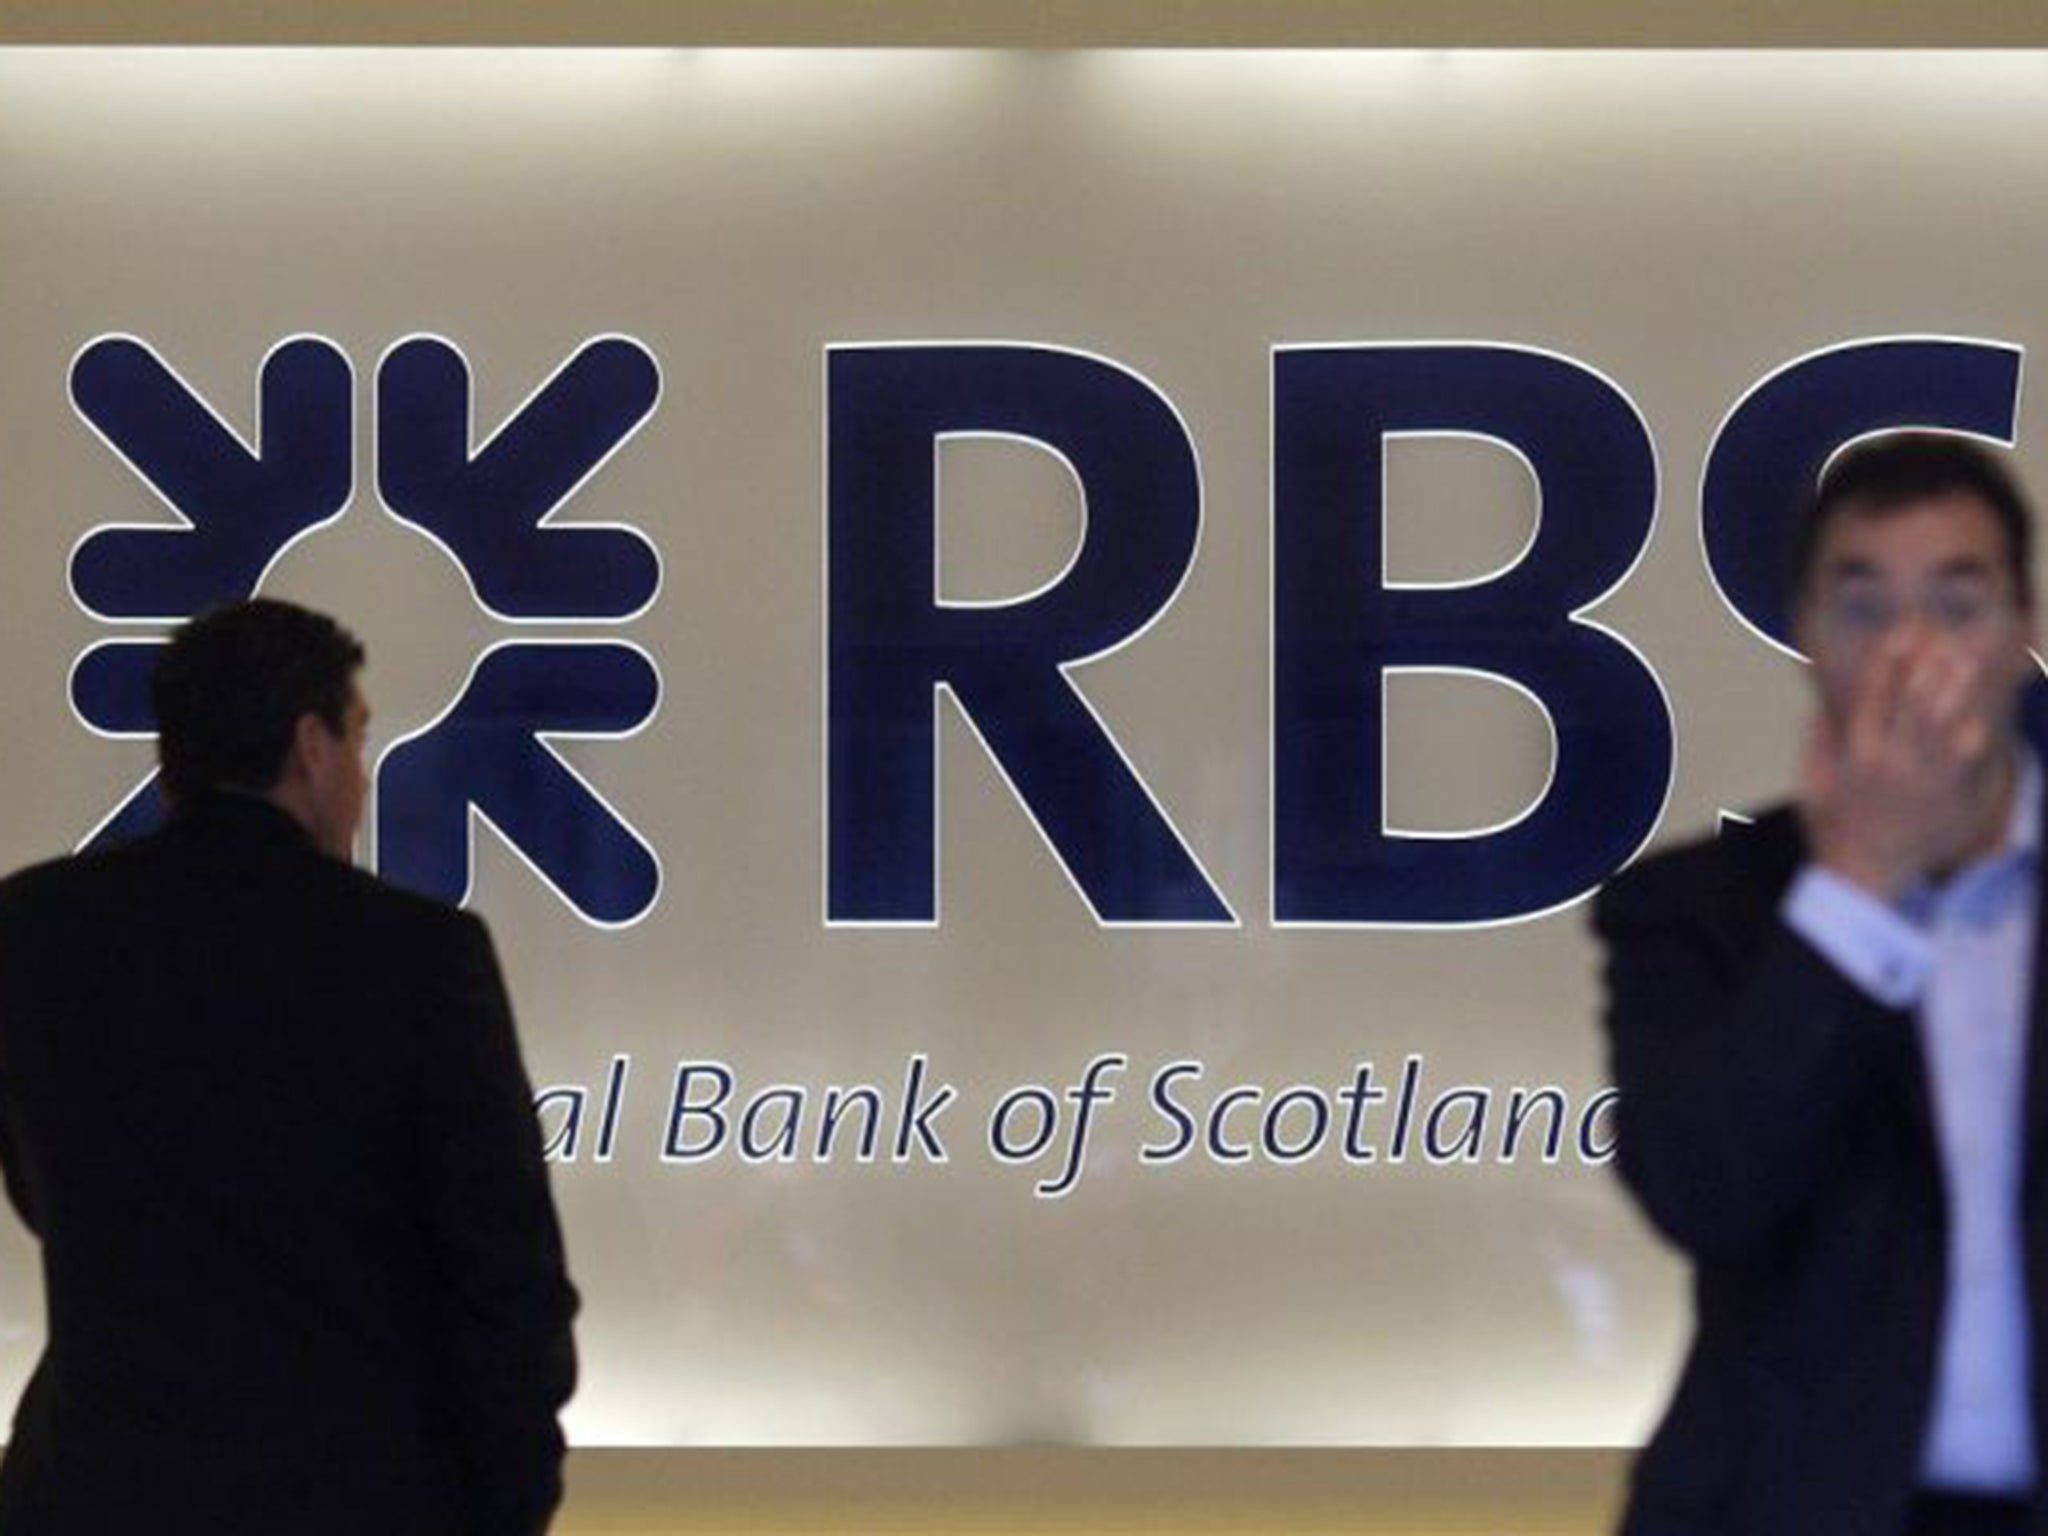 RBS has announced a first-half post-tax loss of £153m, coming after £1.5bn of restructuring costs and £1.3bn of legal and compensation bills